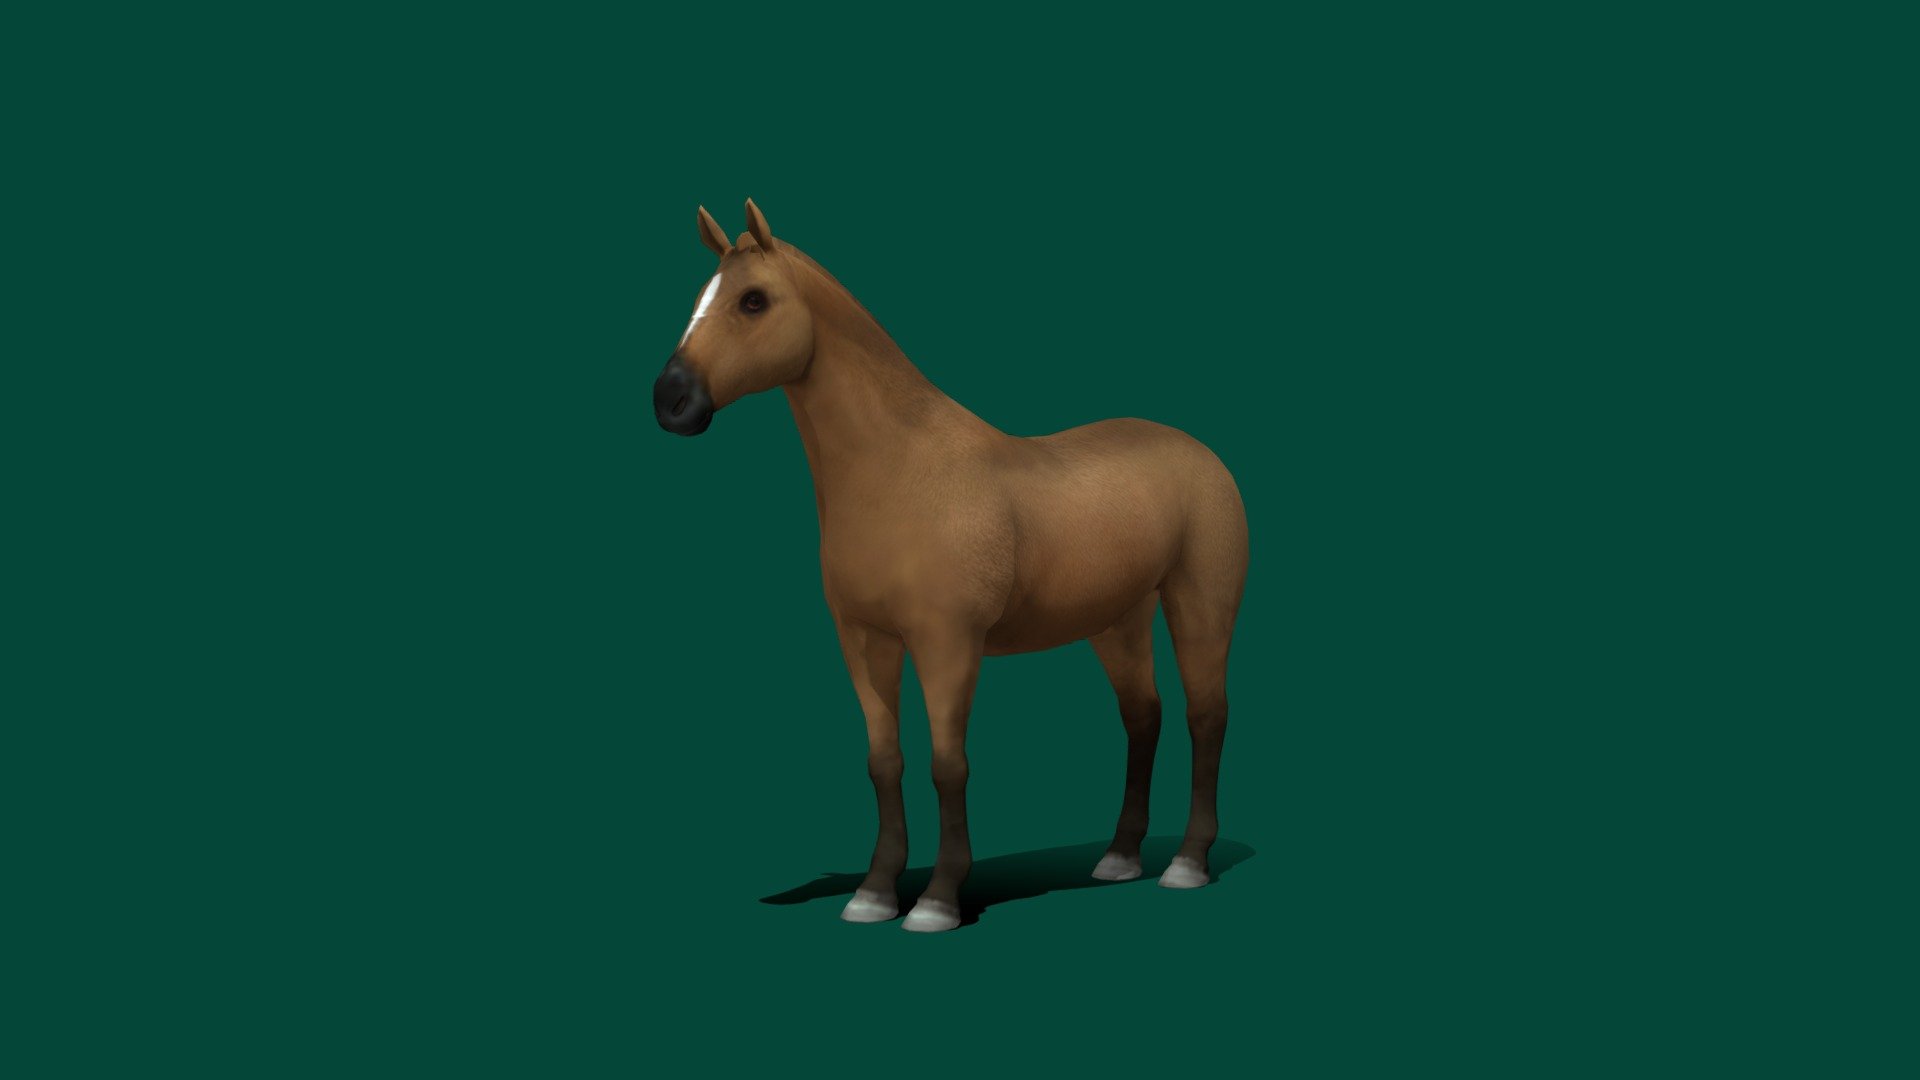 Arabian Horse (Arab Horse ) 

Equus ferus caballus Mammal Animal   (Low poly)

1 Draw Calls

Gameready

13 Animations

4K PBR Textures Material

Unreal FBX

Unity FBX  

Blend File 

USDZ File (AR Ready). Real Scale Dimension

Textures Files

GLB File

Gltf File ( Spark AR, Lens Studio(SnapChat) , Effector(Tiktok) , Spline, Play Canvas ) Compatible

Triangles: 5016
Vertices: 2529
 Diffuse , Metallic, Roughness , Normal Map ,Specular Map,AO
The Arabian or Arab horse is a breed of horse that originated on the Arabian Peninsula. With a distinctive head shape and high tail carriage, the Arabian is one of the most easily recognizable horse breeds in the world. 
Origin: Middle East
Scientific name: Equus ferus caballus
Color: Bay, black, chestnut, or gray. Occasional dominant white, sabino, or rabicano patterns
Distinguishing features: Finely chiseled bone structure, concave profile, arched neck, comparatively level croup, high-carried tail - Arabian Horse (LowPoly) - Buy Royalty Free 3D model by Nyilonelycompany 3d model